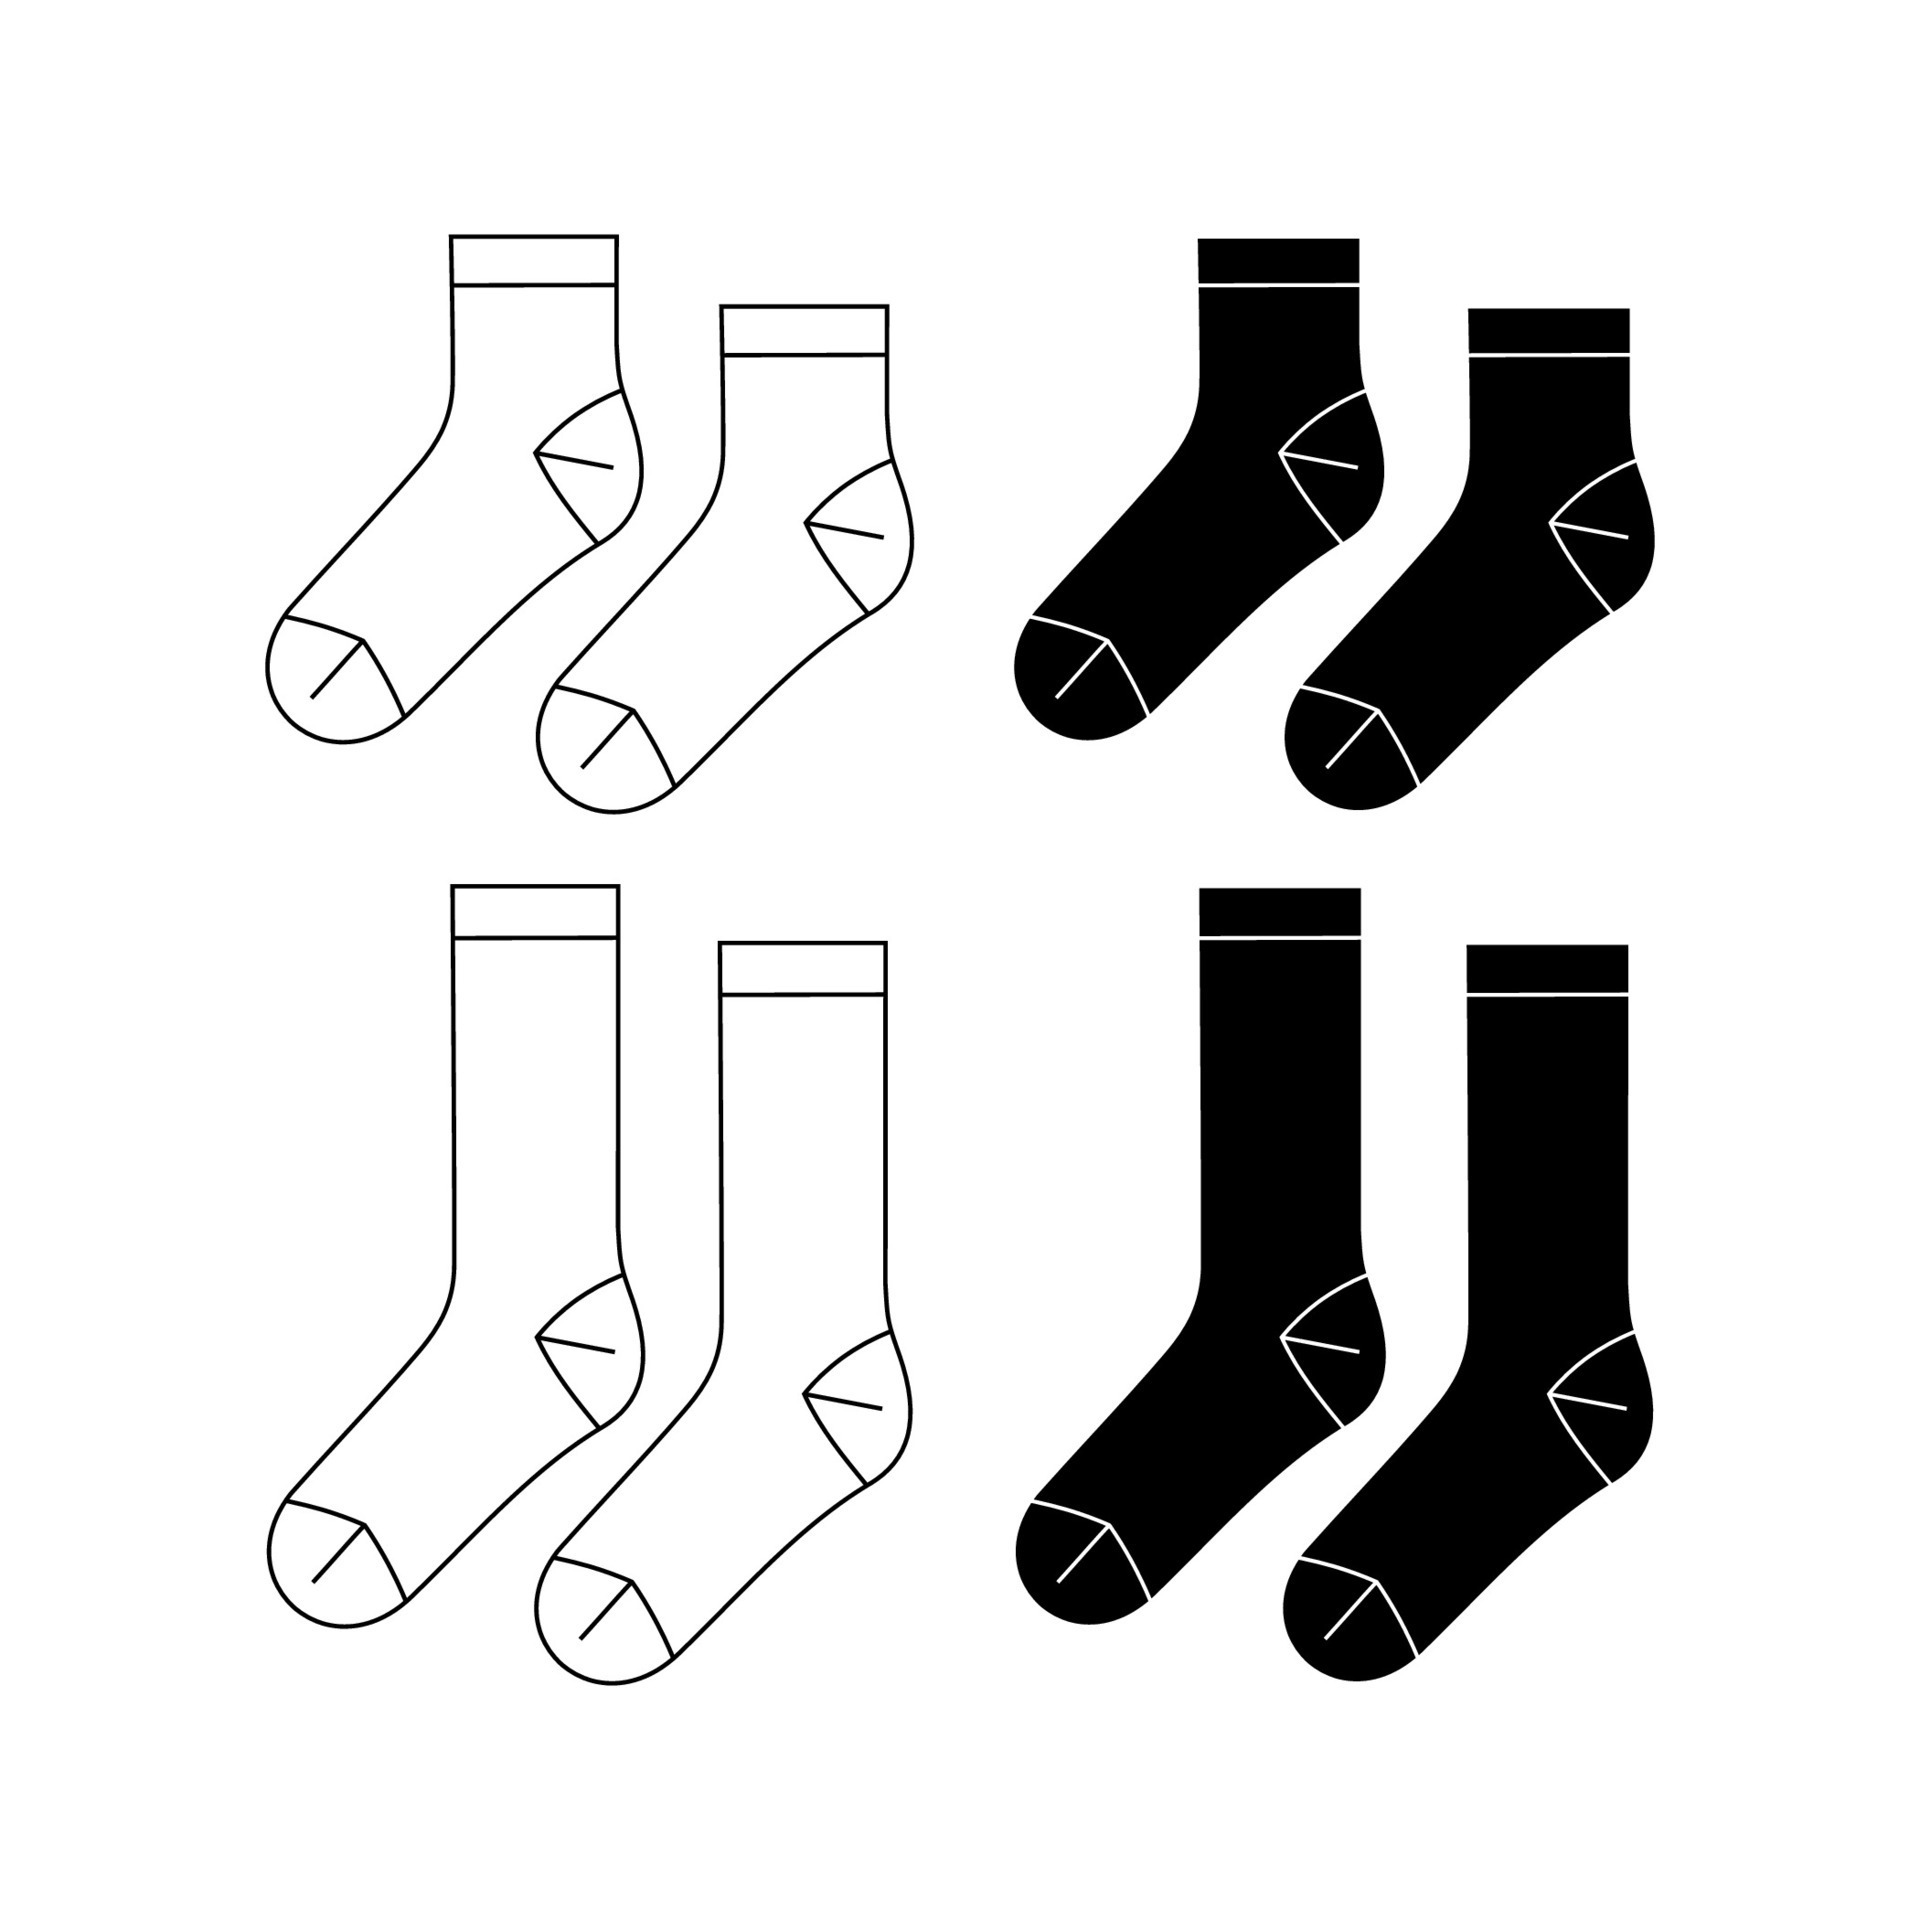 https://static.vecteezy.com/system/resources/previews/034/964/842/original/set-of-mid-calf-length-socks-flat-sketch-fashion-illustration-drawing-template-mock-up-calf-length-socks-cad-drawing-for-unisex-men-s-and-women-s-quarter-crew-socks-design-drawing-vector.jpg